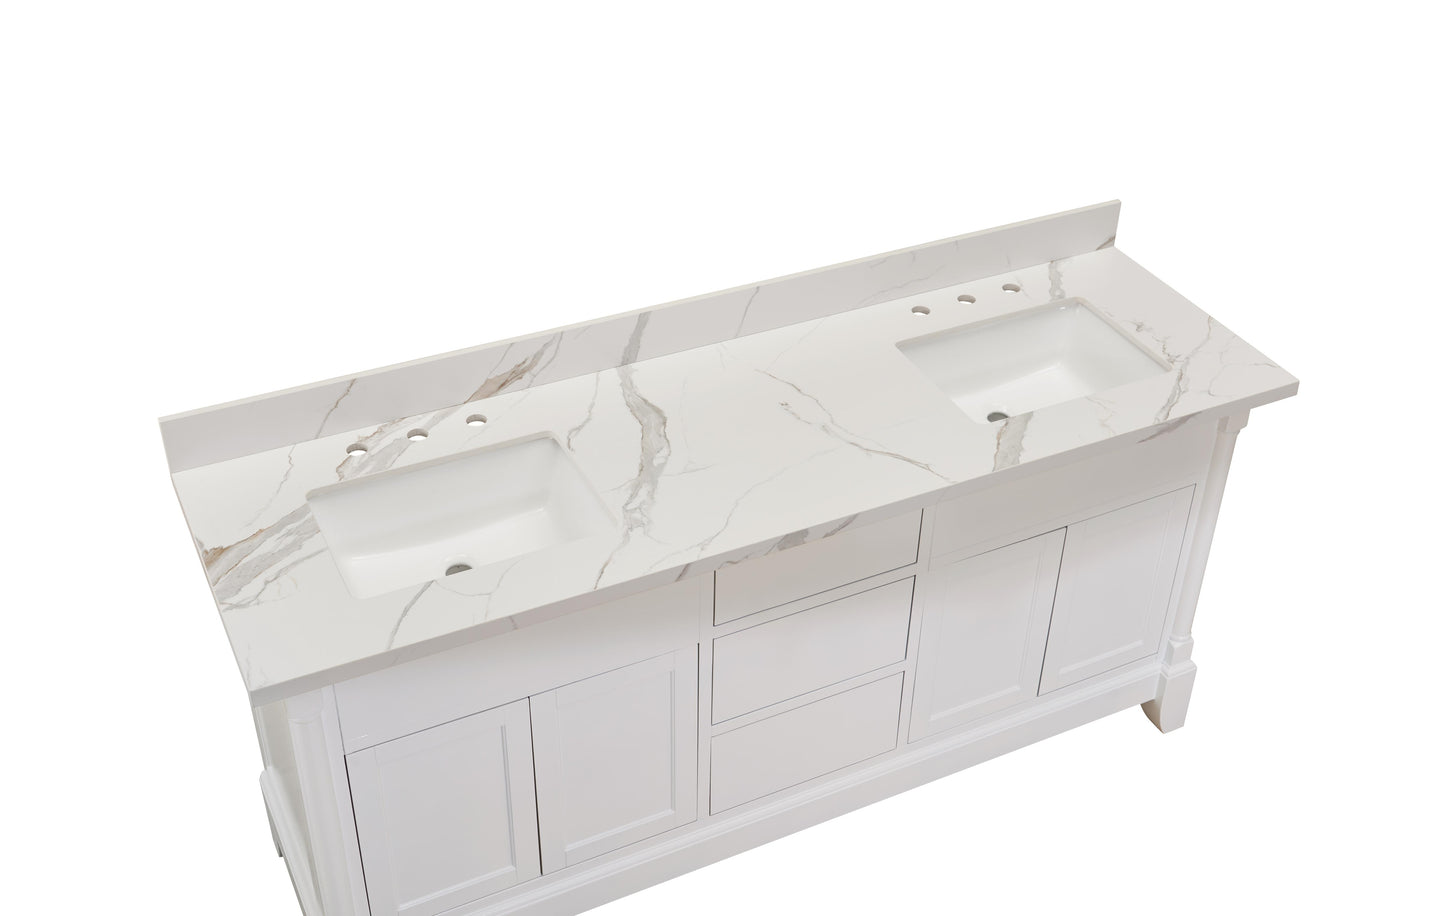 Stone effects Vanity Top in Calacatta White with White Sink